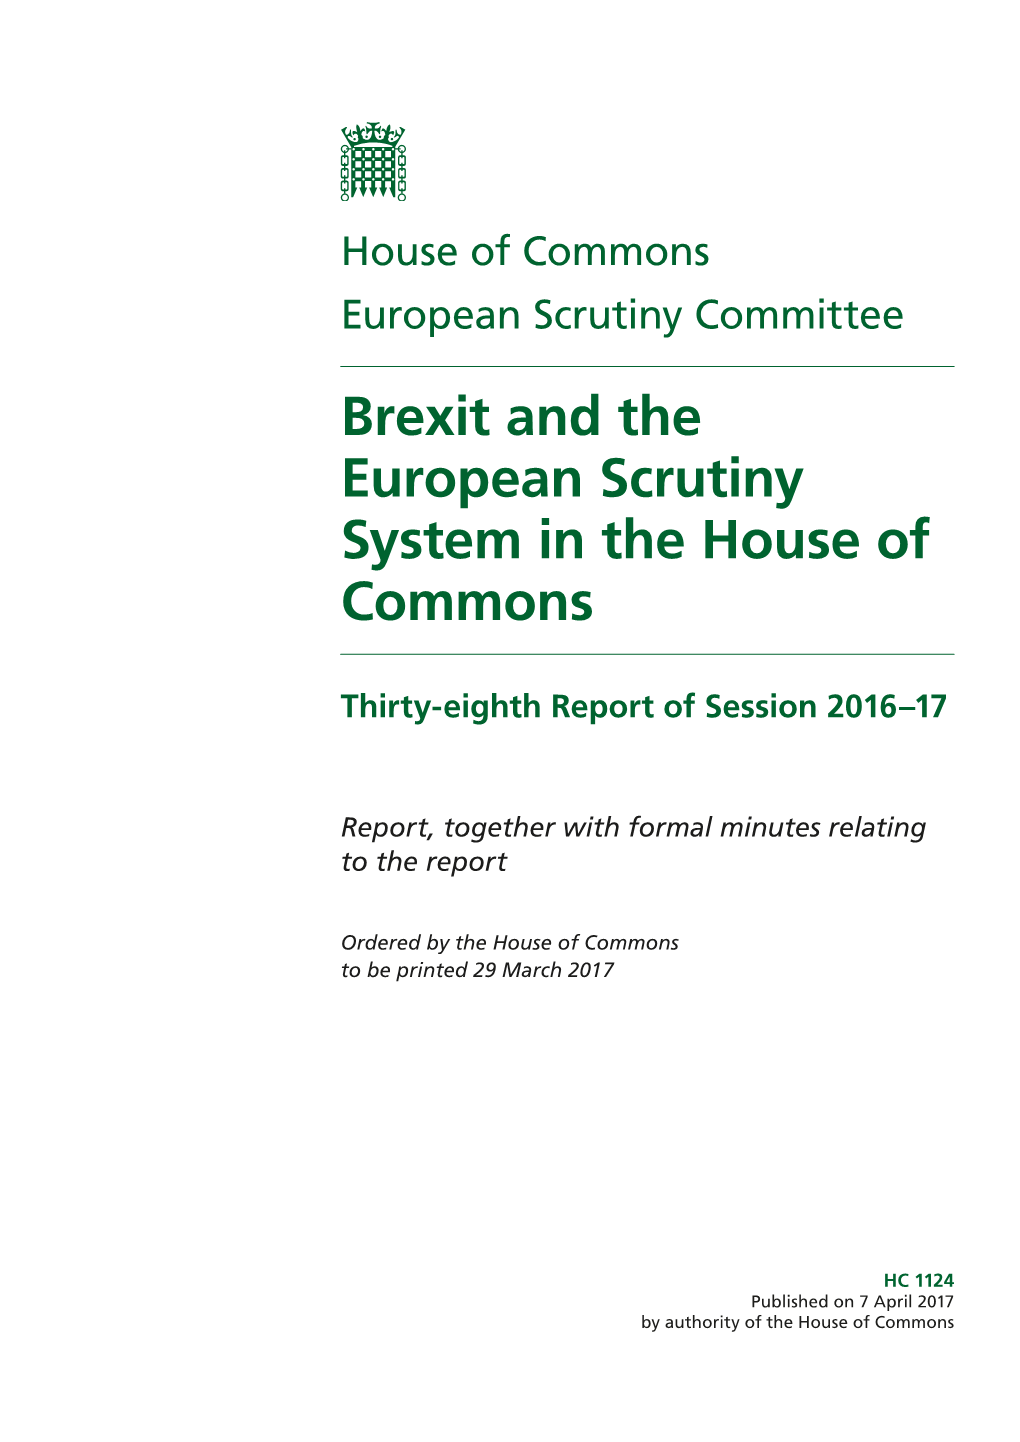 Brexit and the European Scrutiny System in the House of Commons